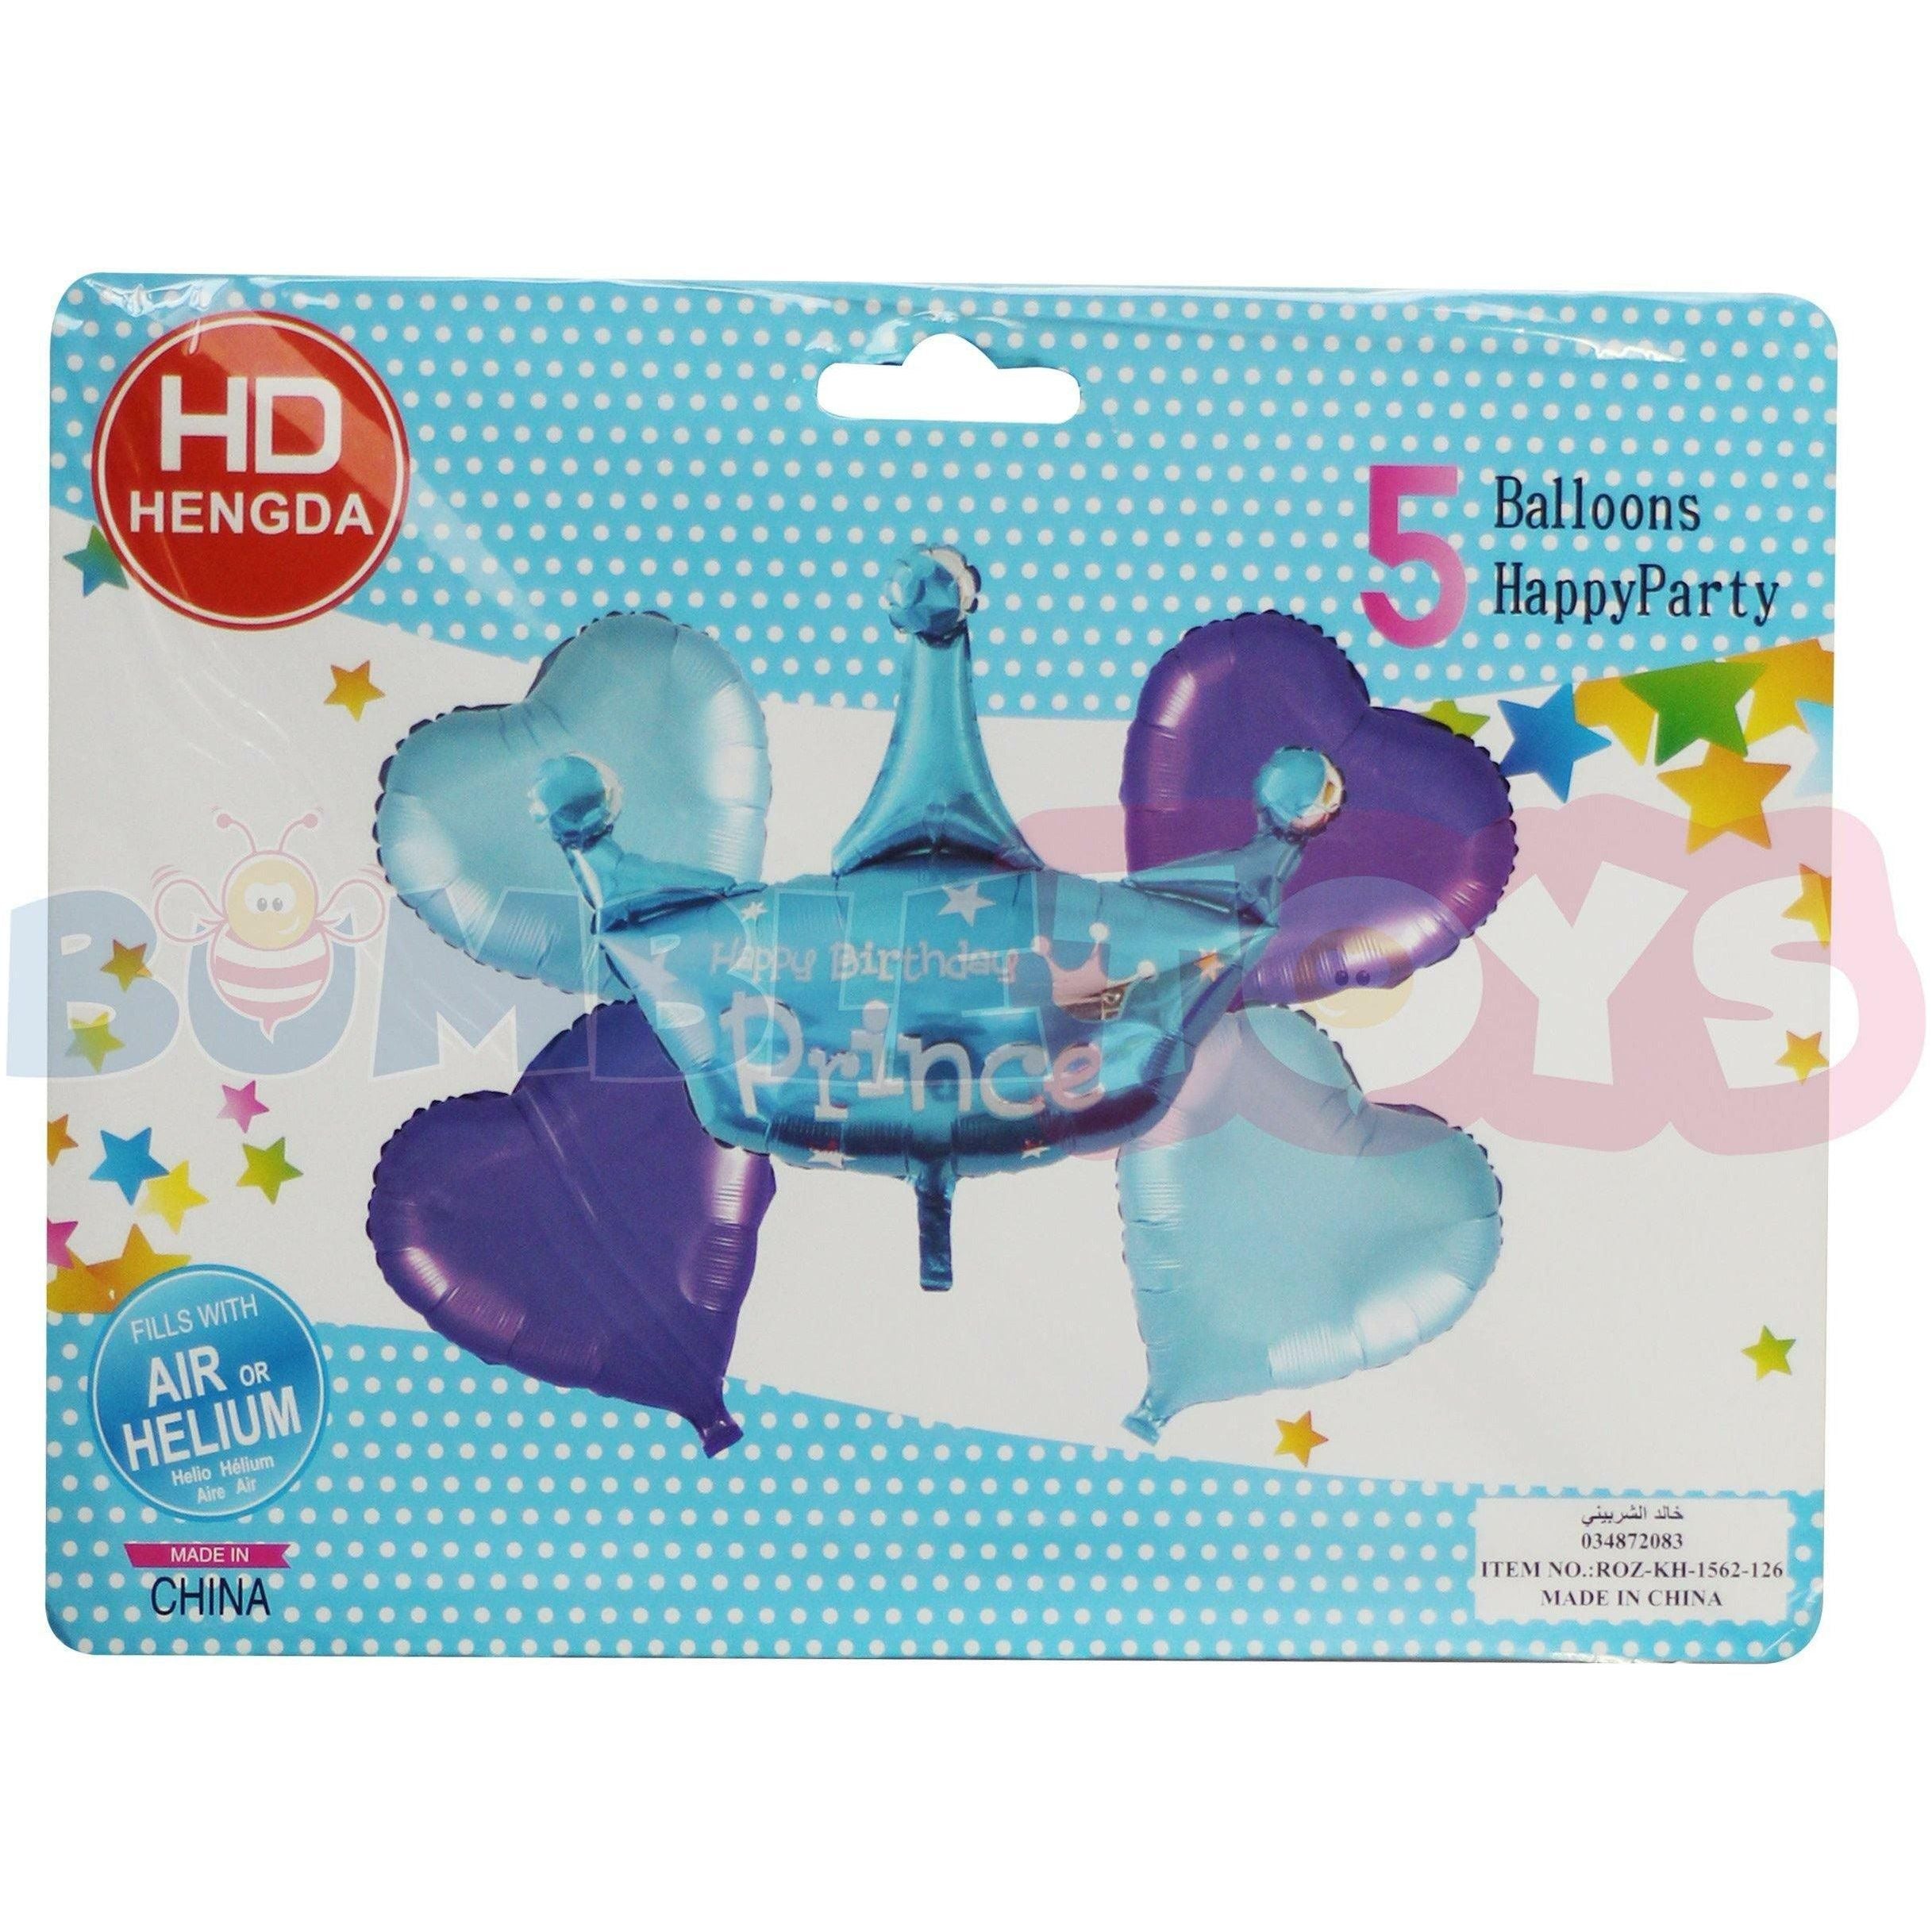 Happy Birthday Prince Helium Balloon Party Accessories Set of 5 PCs - BumbleToys - 2-4 Years, 4+ Years, Balloons, Boys, Helium, KH, Party Supplies